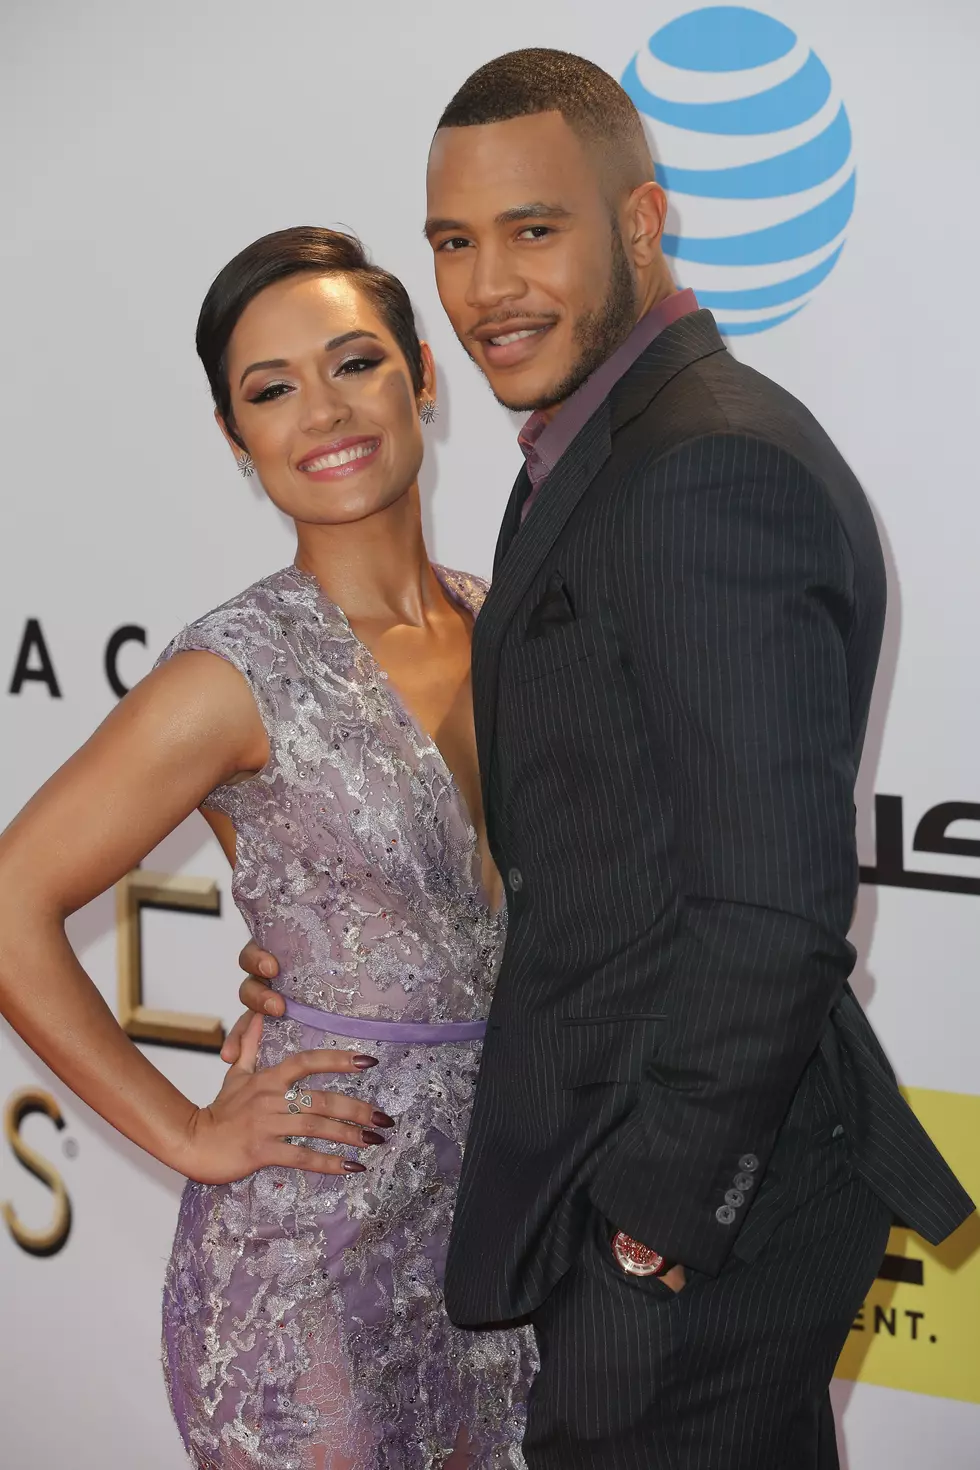 Empire Stars Trai Byers And Grace Gealey Get Married &#8211; Tha Wire [VIDEO]